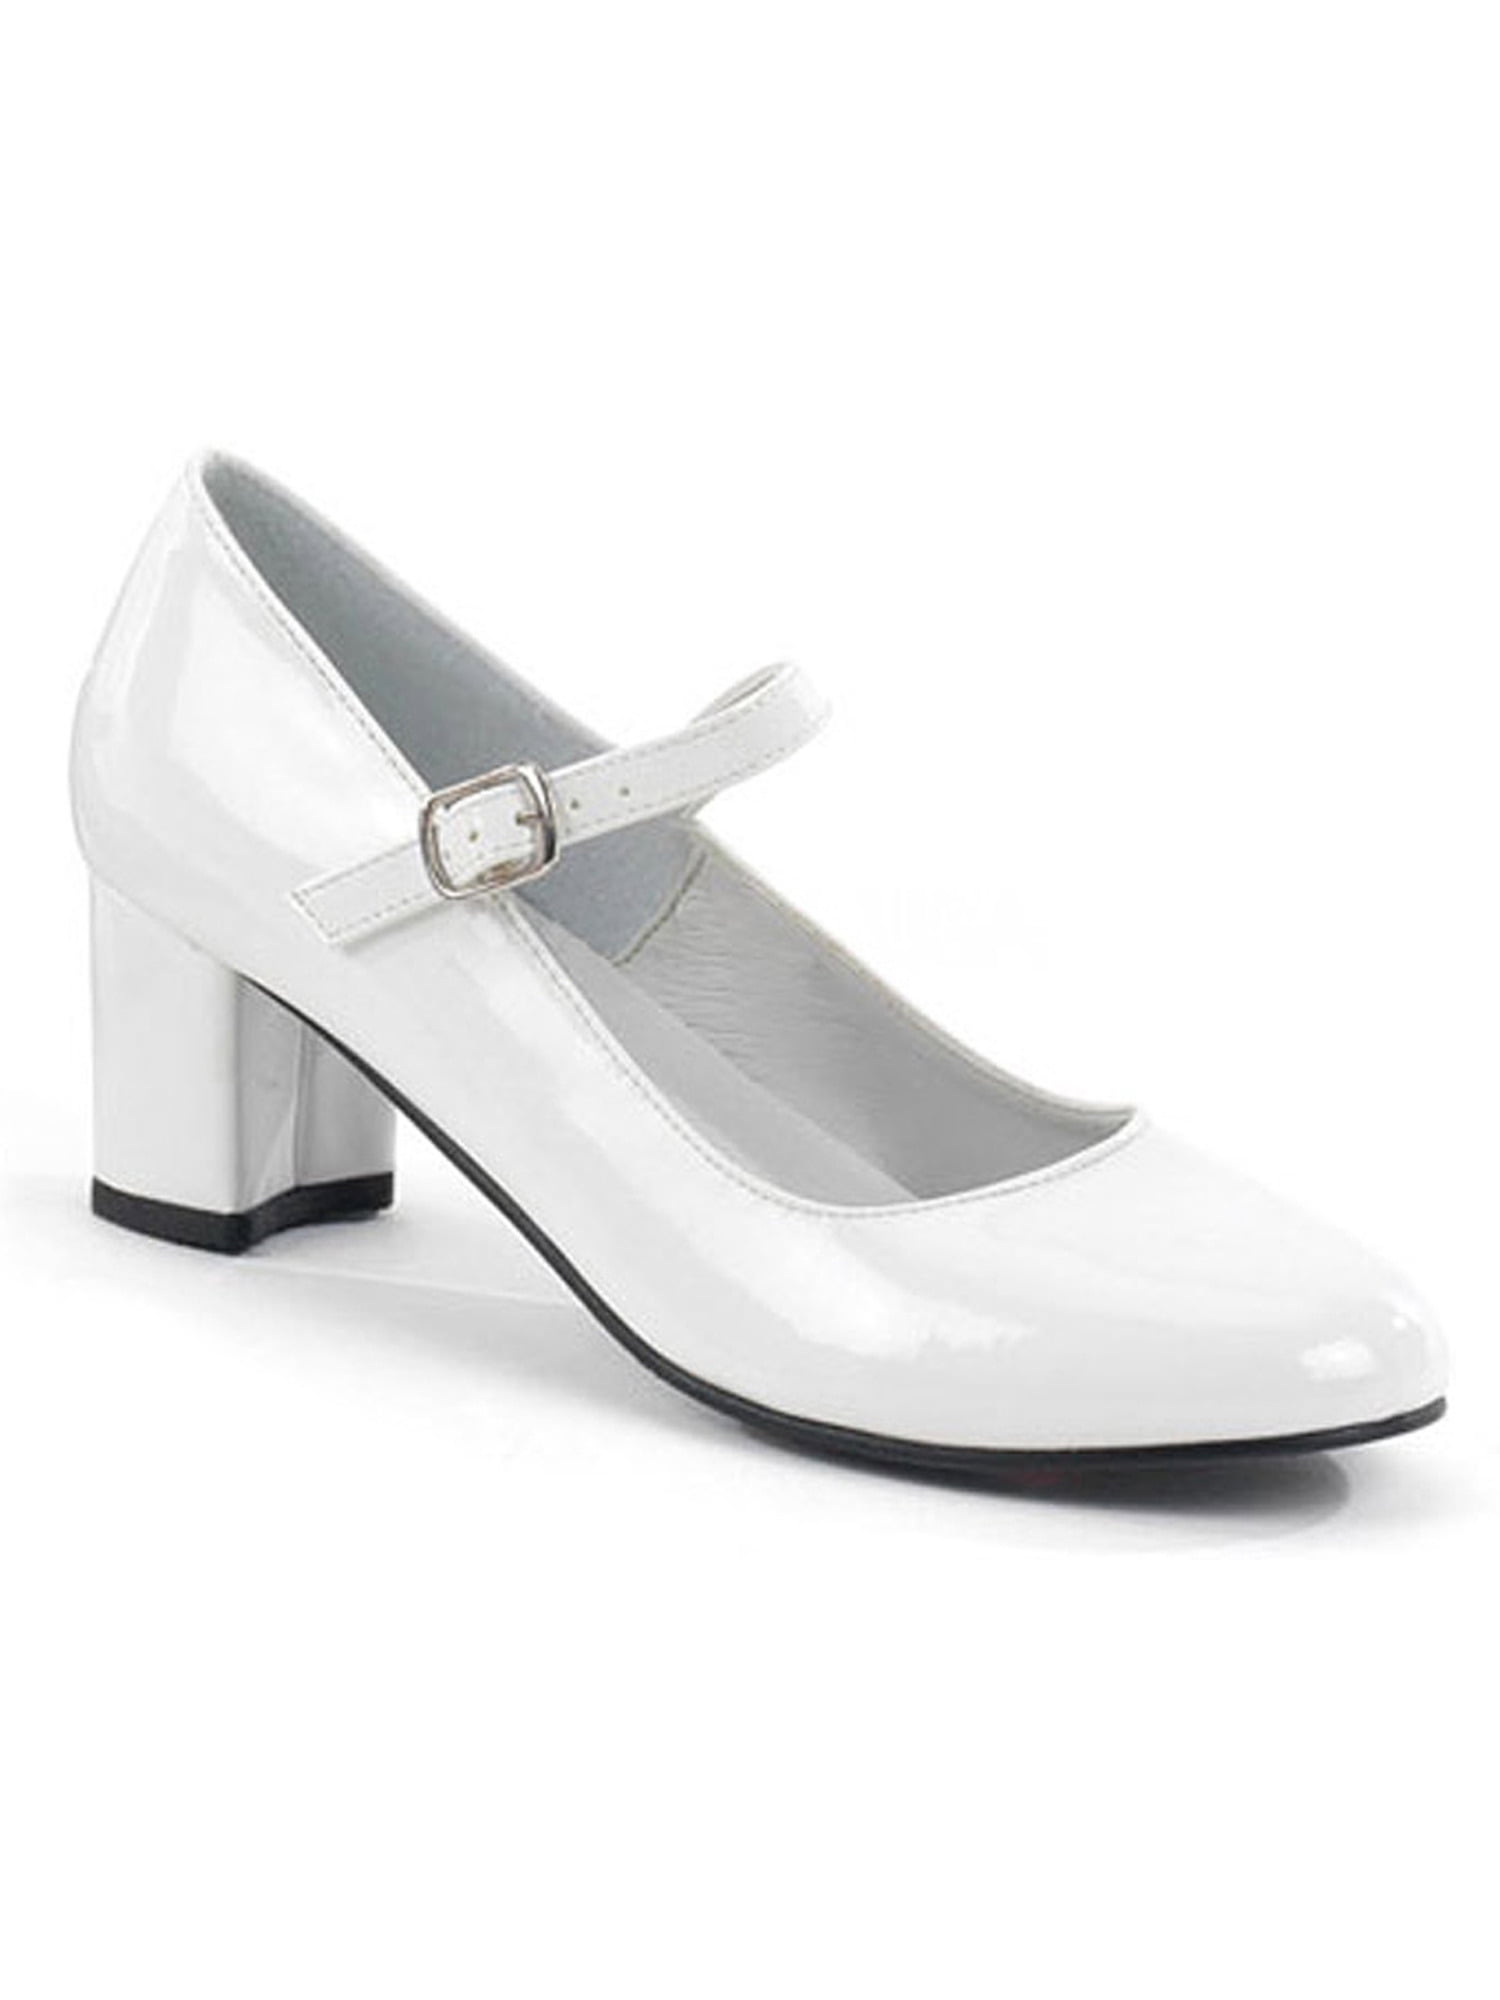 mary jane court shoes low heel